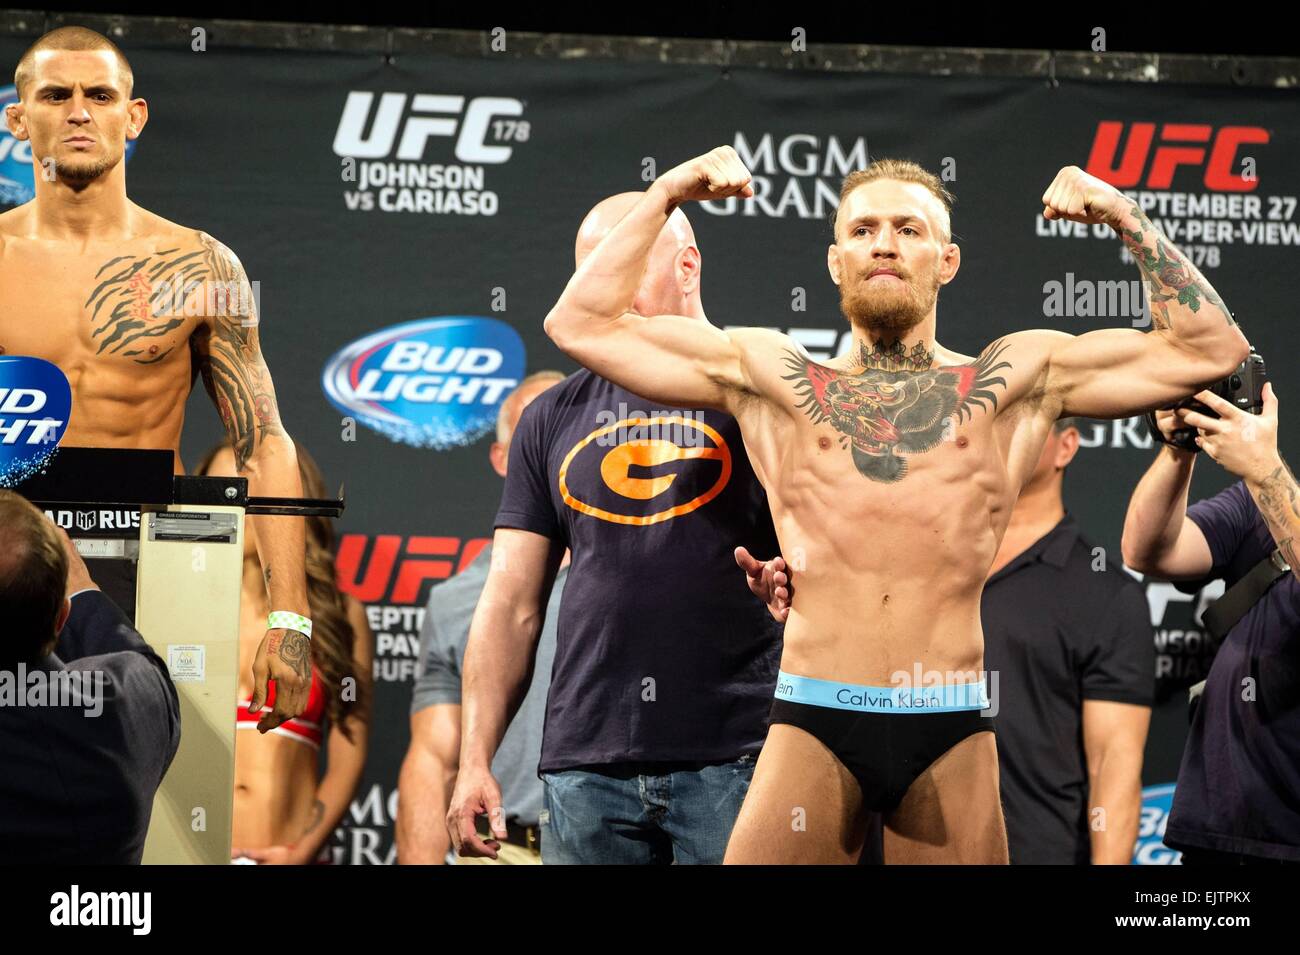 conor-mcgregor-ufc-178-press-day-thursday-25th-at-1pm-at-the-mgm-grand-EJTPKX.jpg